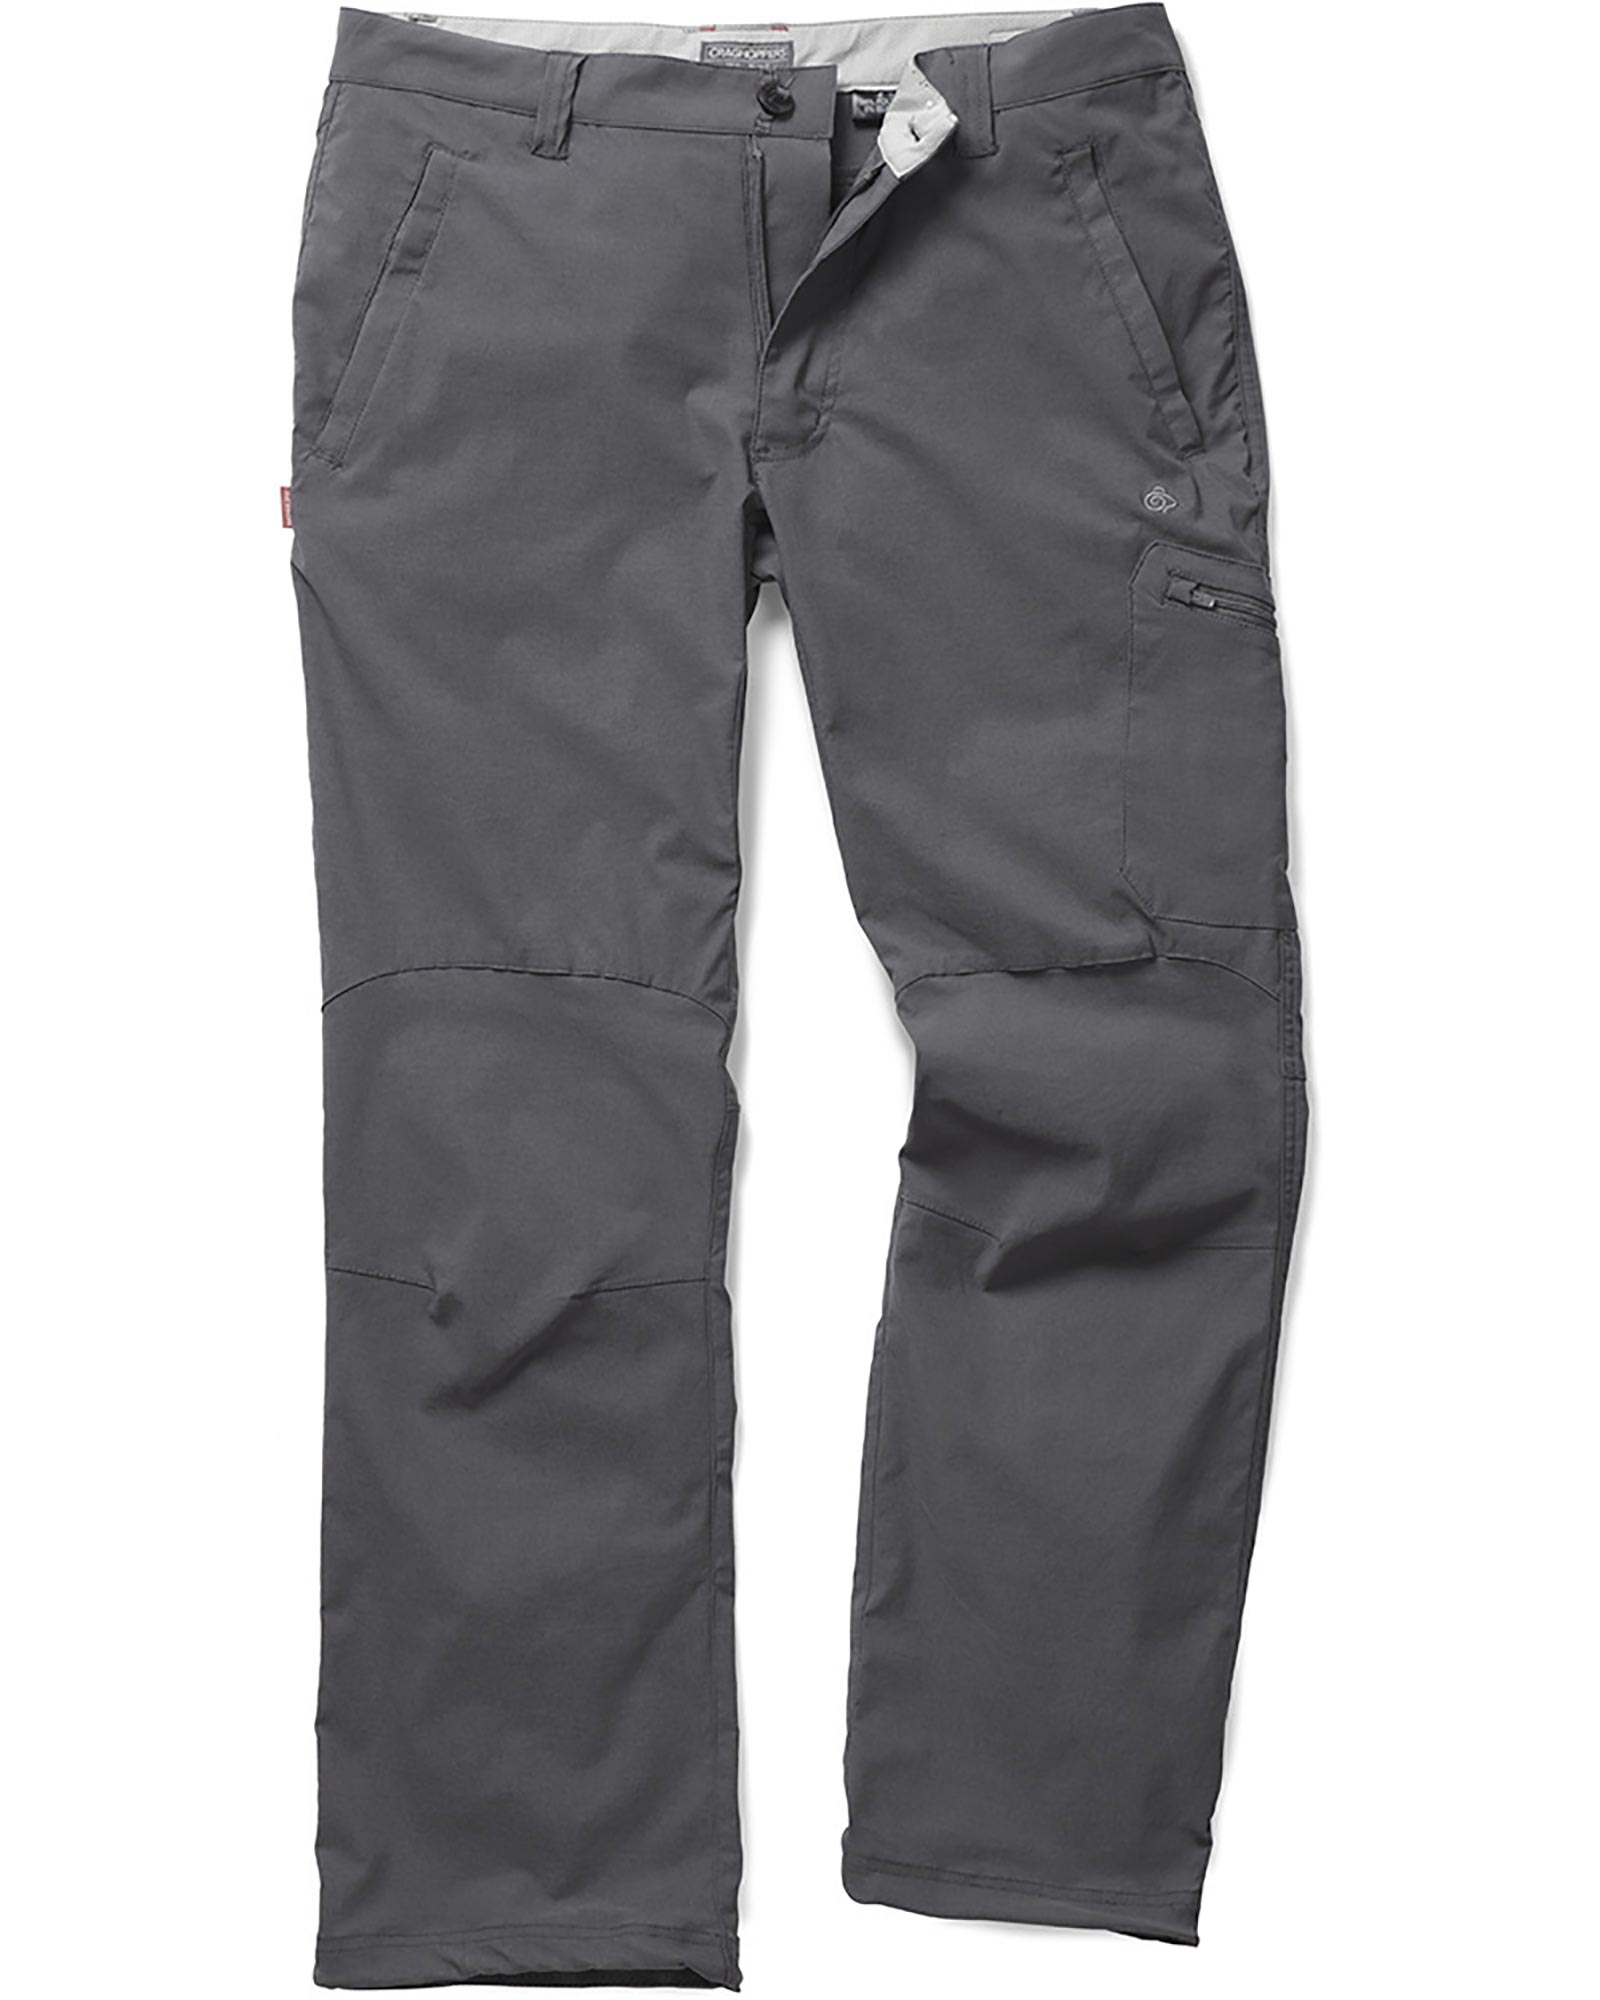 Craghoppers NosiLife Pro Stretch Men's Trousers 0